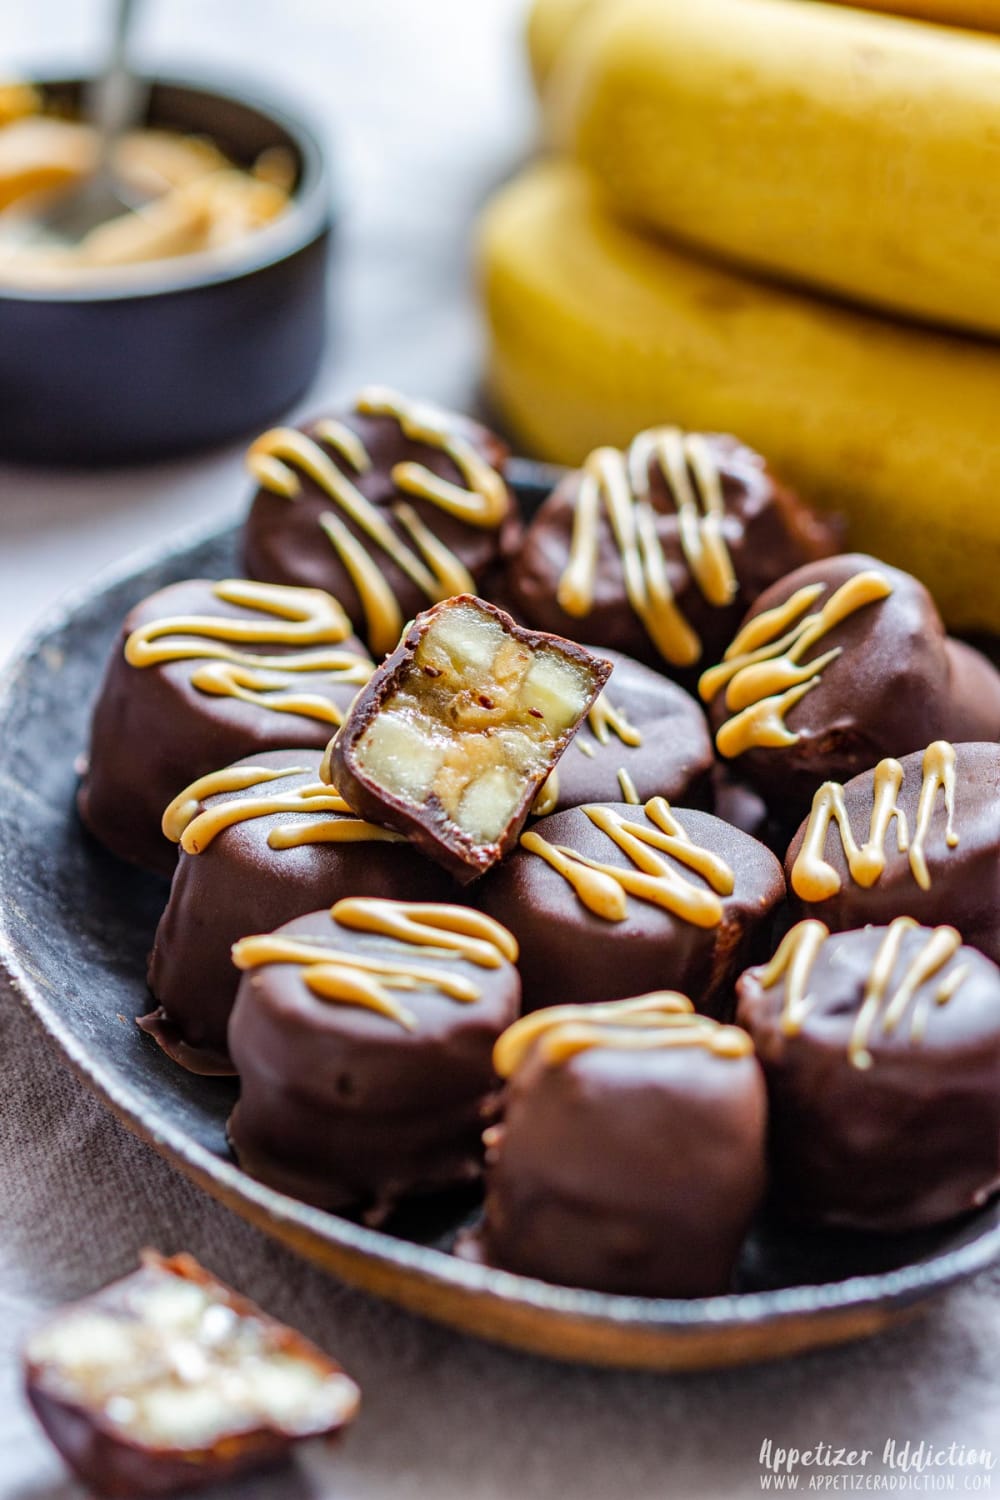 Frozen Chocolate Banana Bites with Peanut Butter